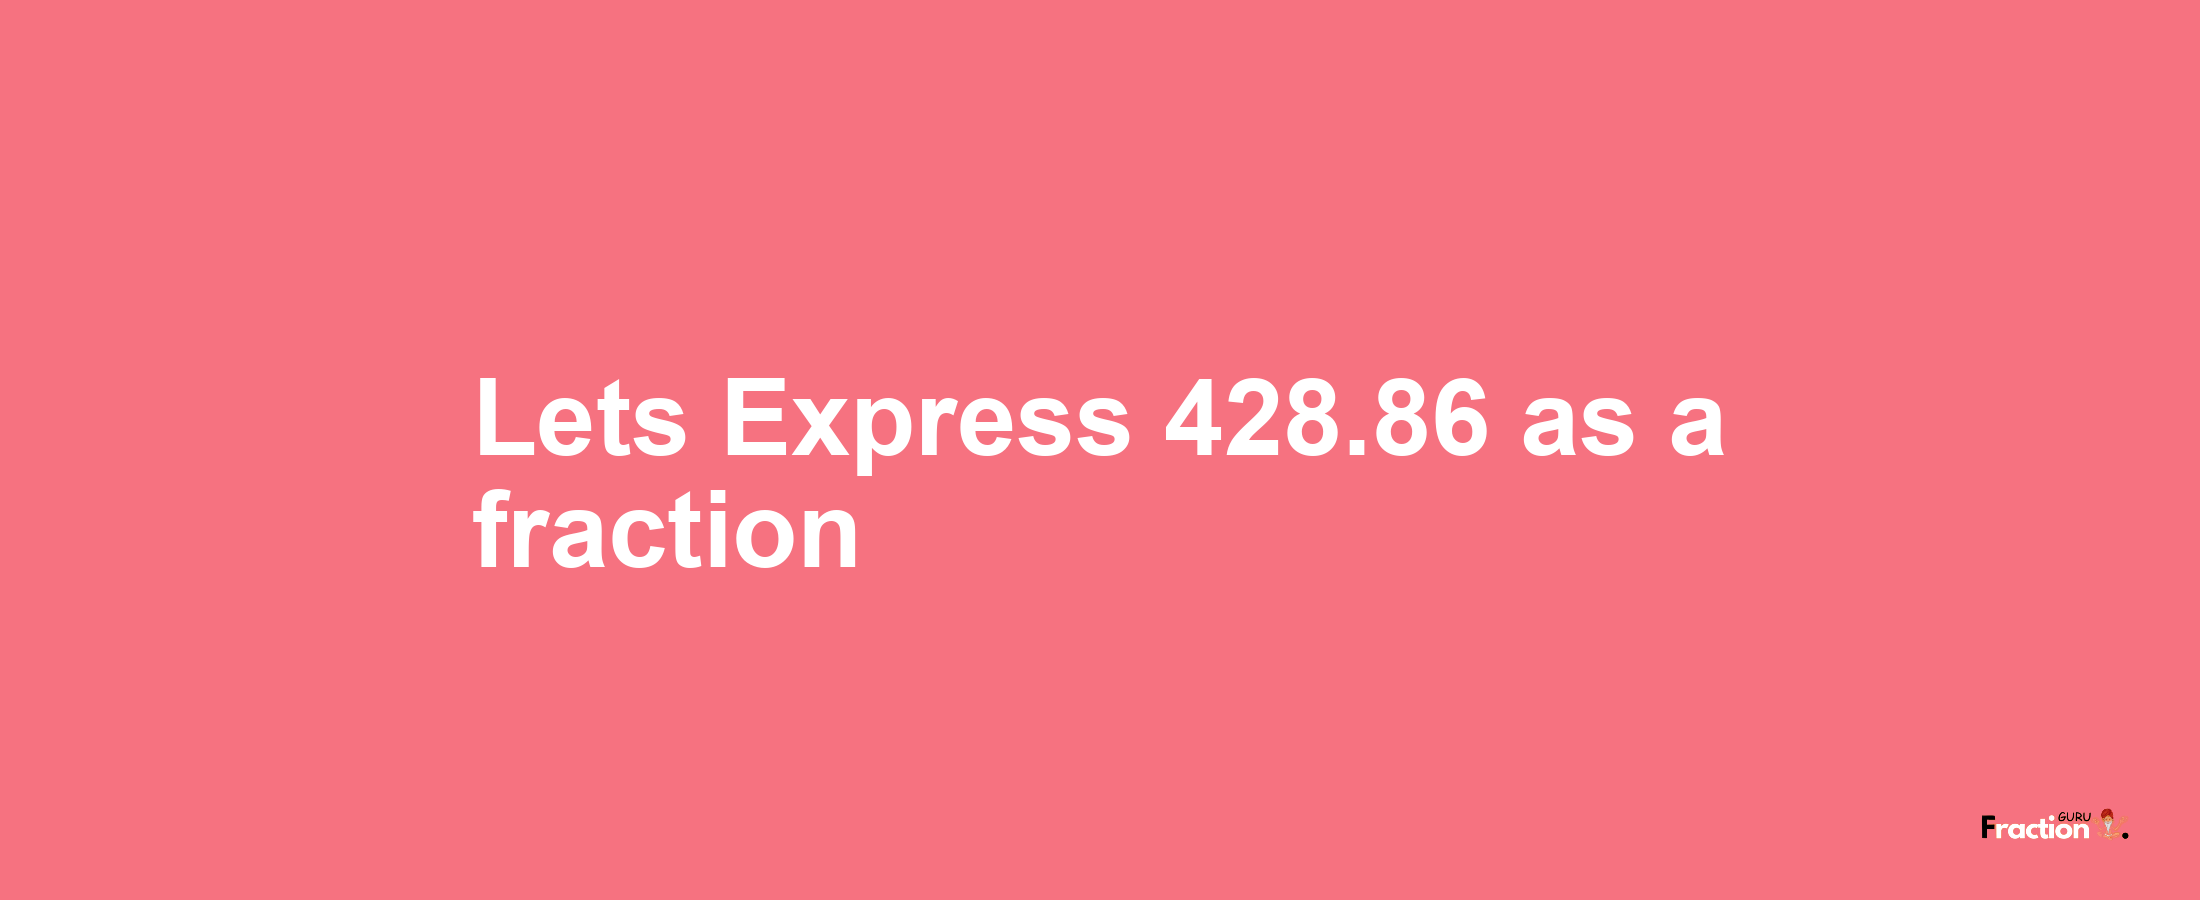 Lets Express 428.86 as afraction